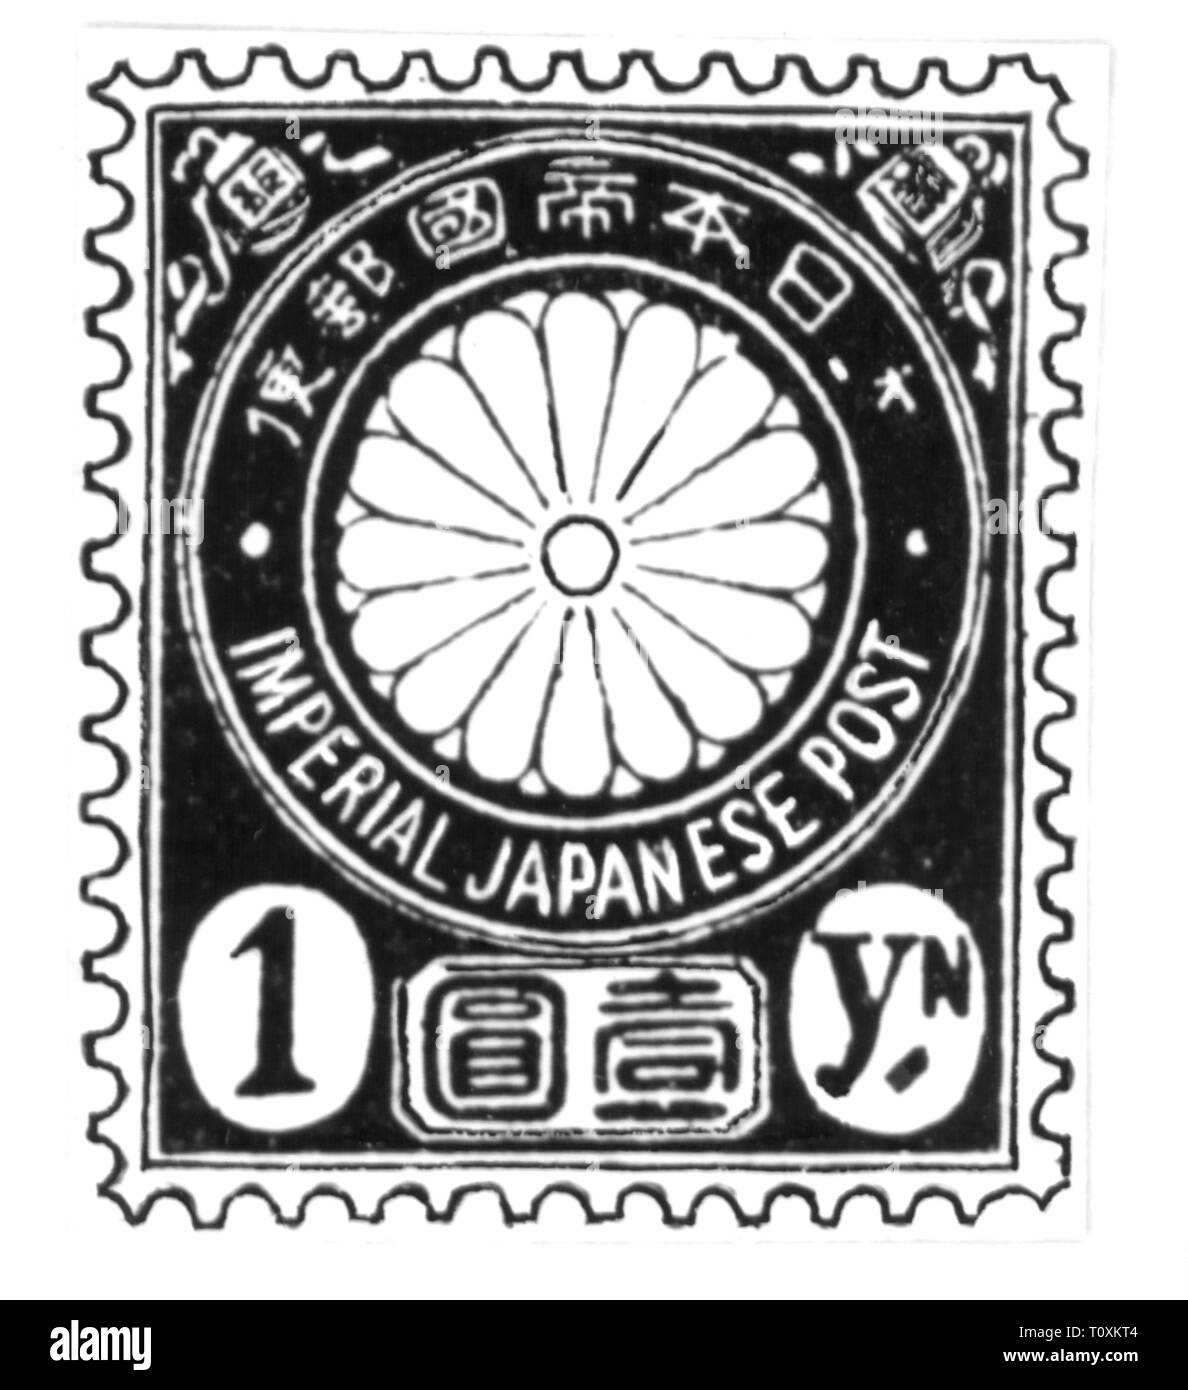 Mail, francobolli, Giappone, 1 yen francobollo, chrysanth, data di rilascio: 1875, Additional-Rights-Clearance-Info-Not-Available Foto Stock